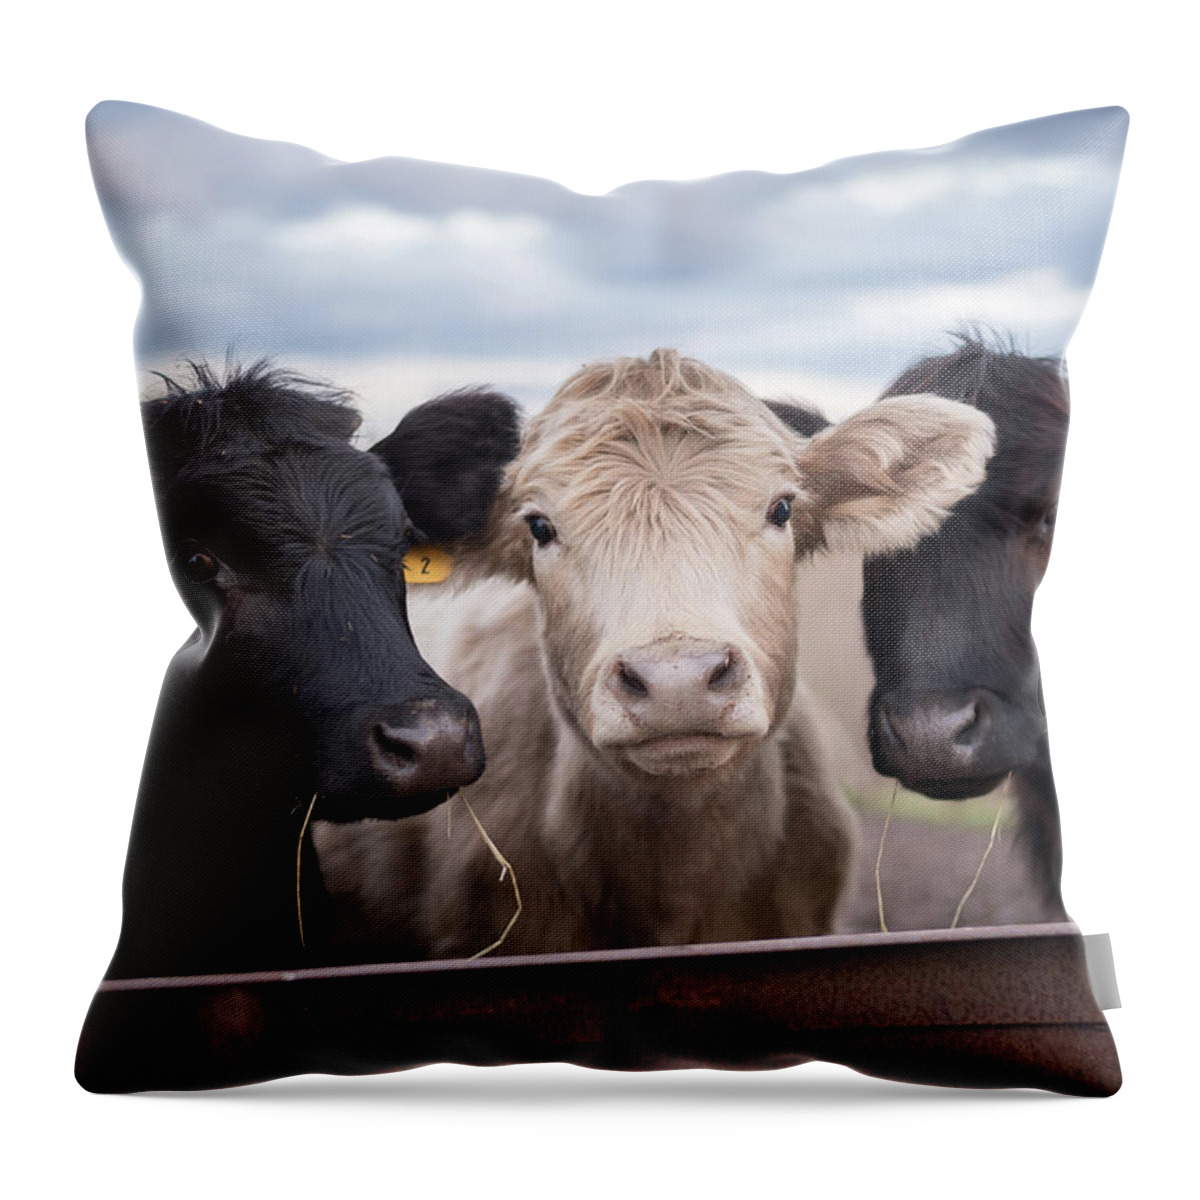 Cows Throw Pillow featuring the photograph We Three Cows by Holden The Moment